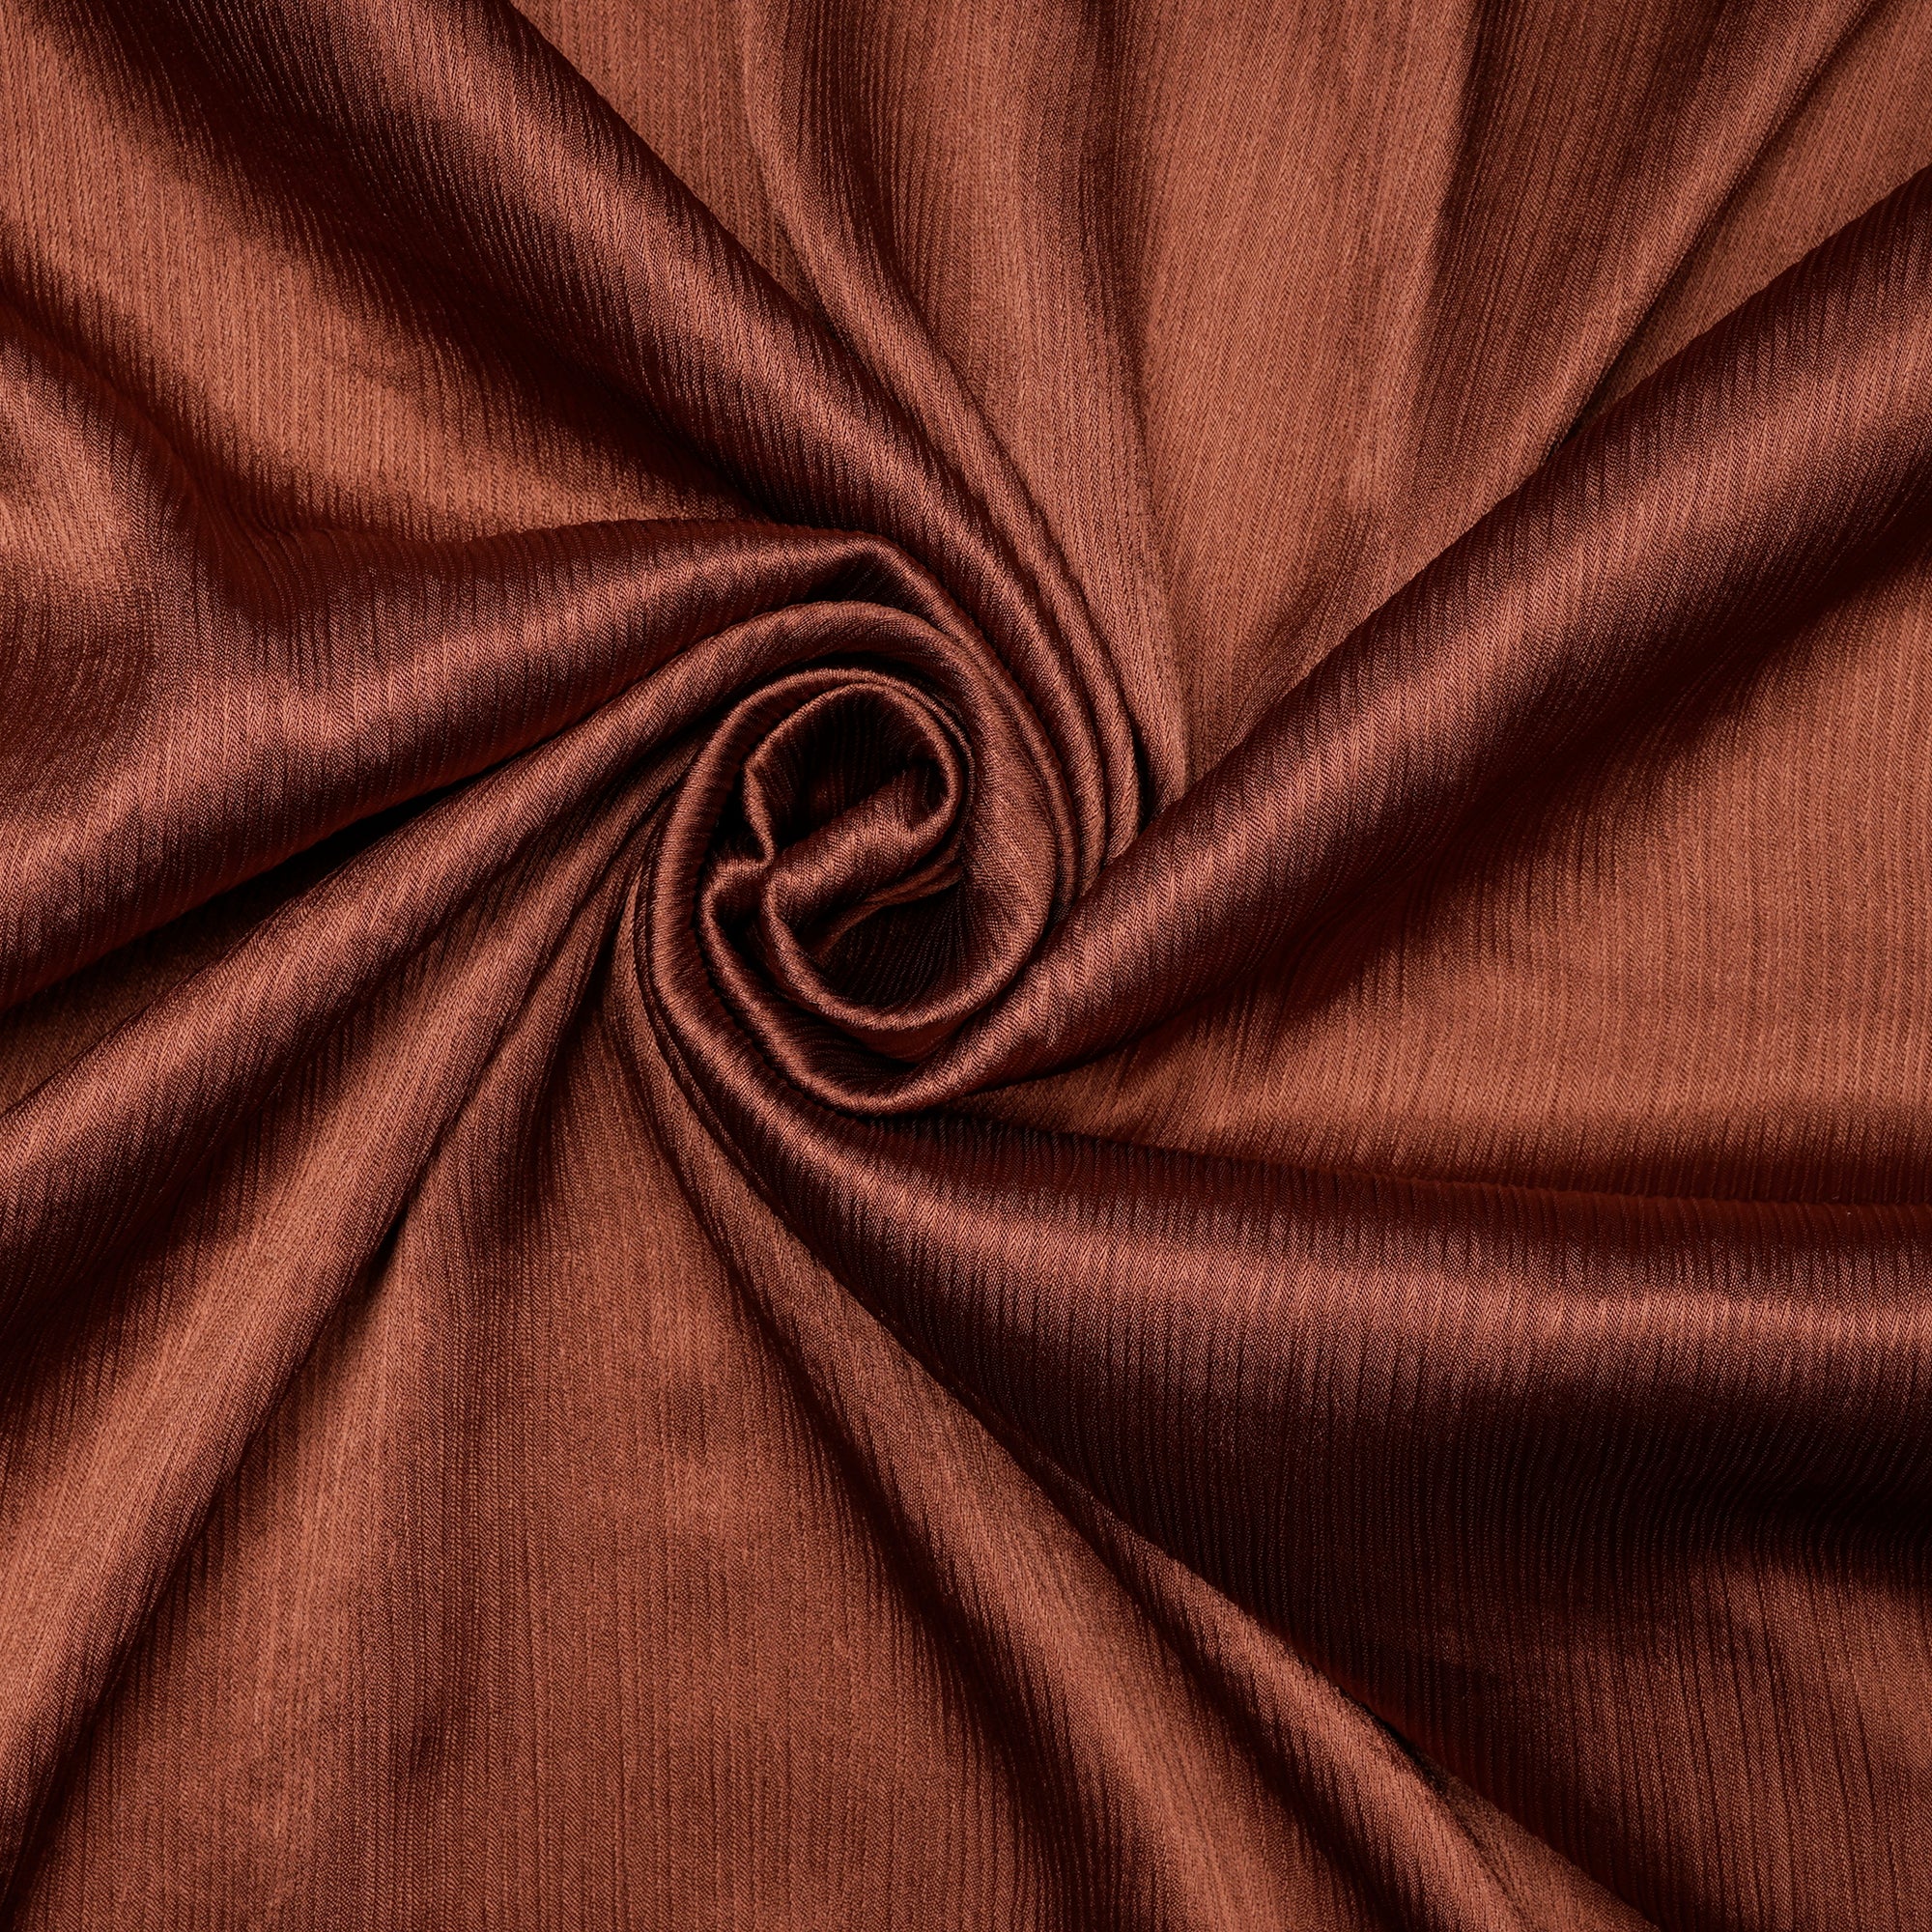 Aragon Imported Crinkled Satin Fabric (60" Wide)